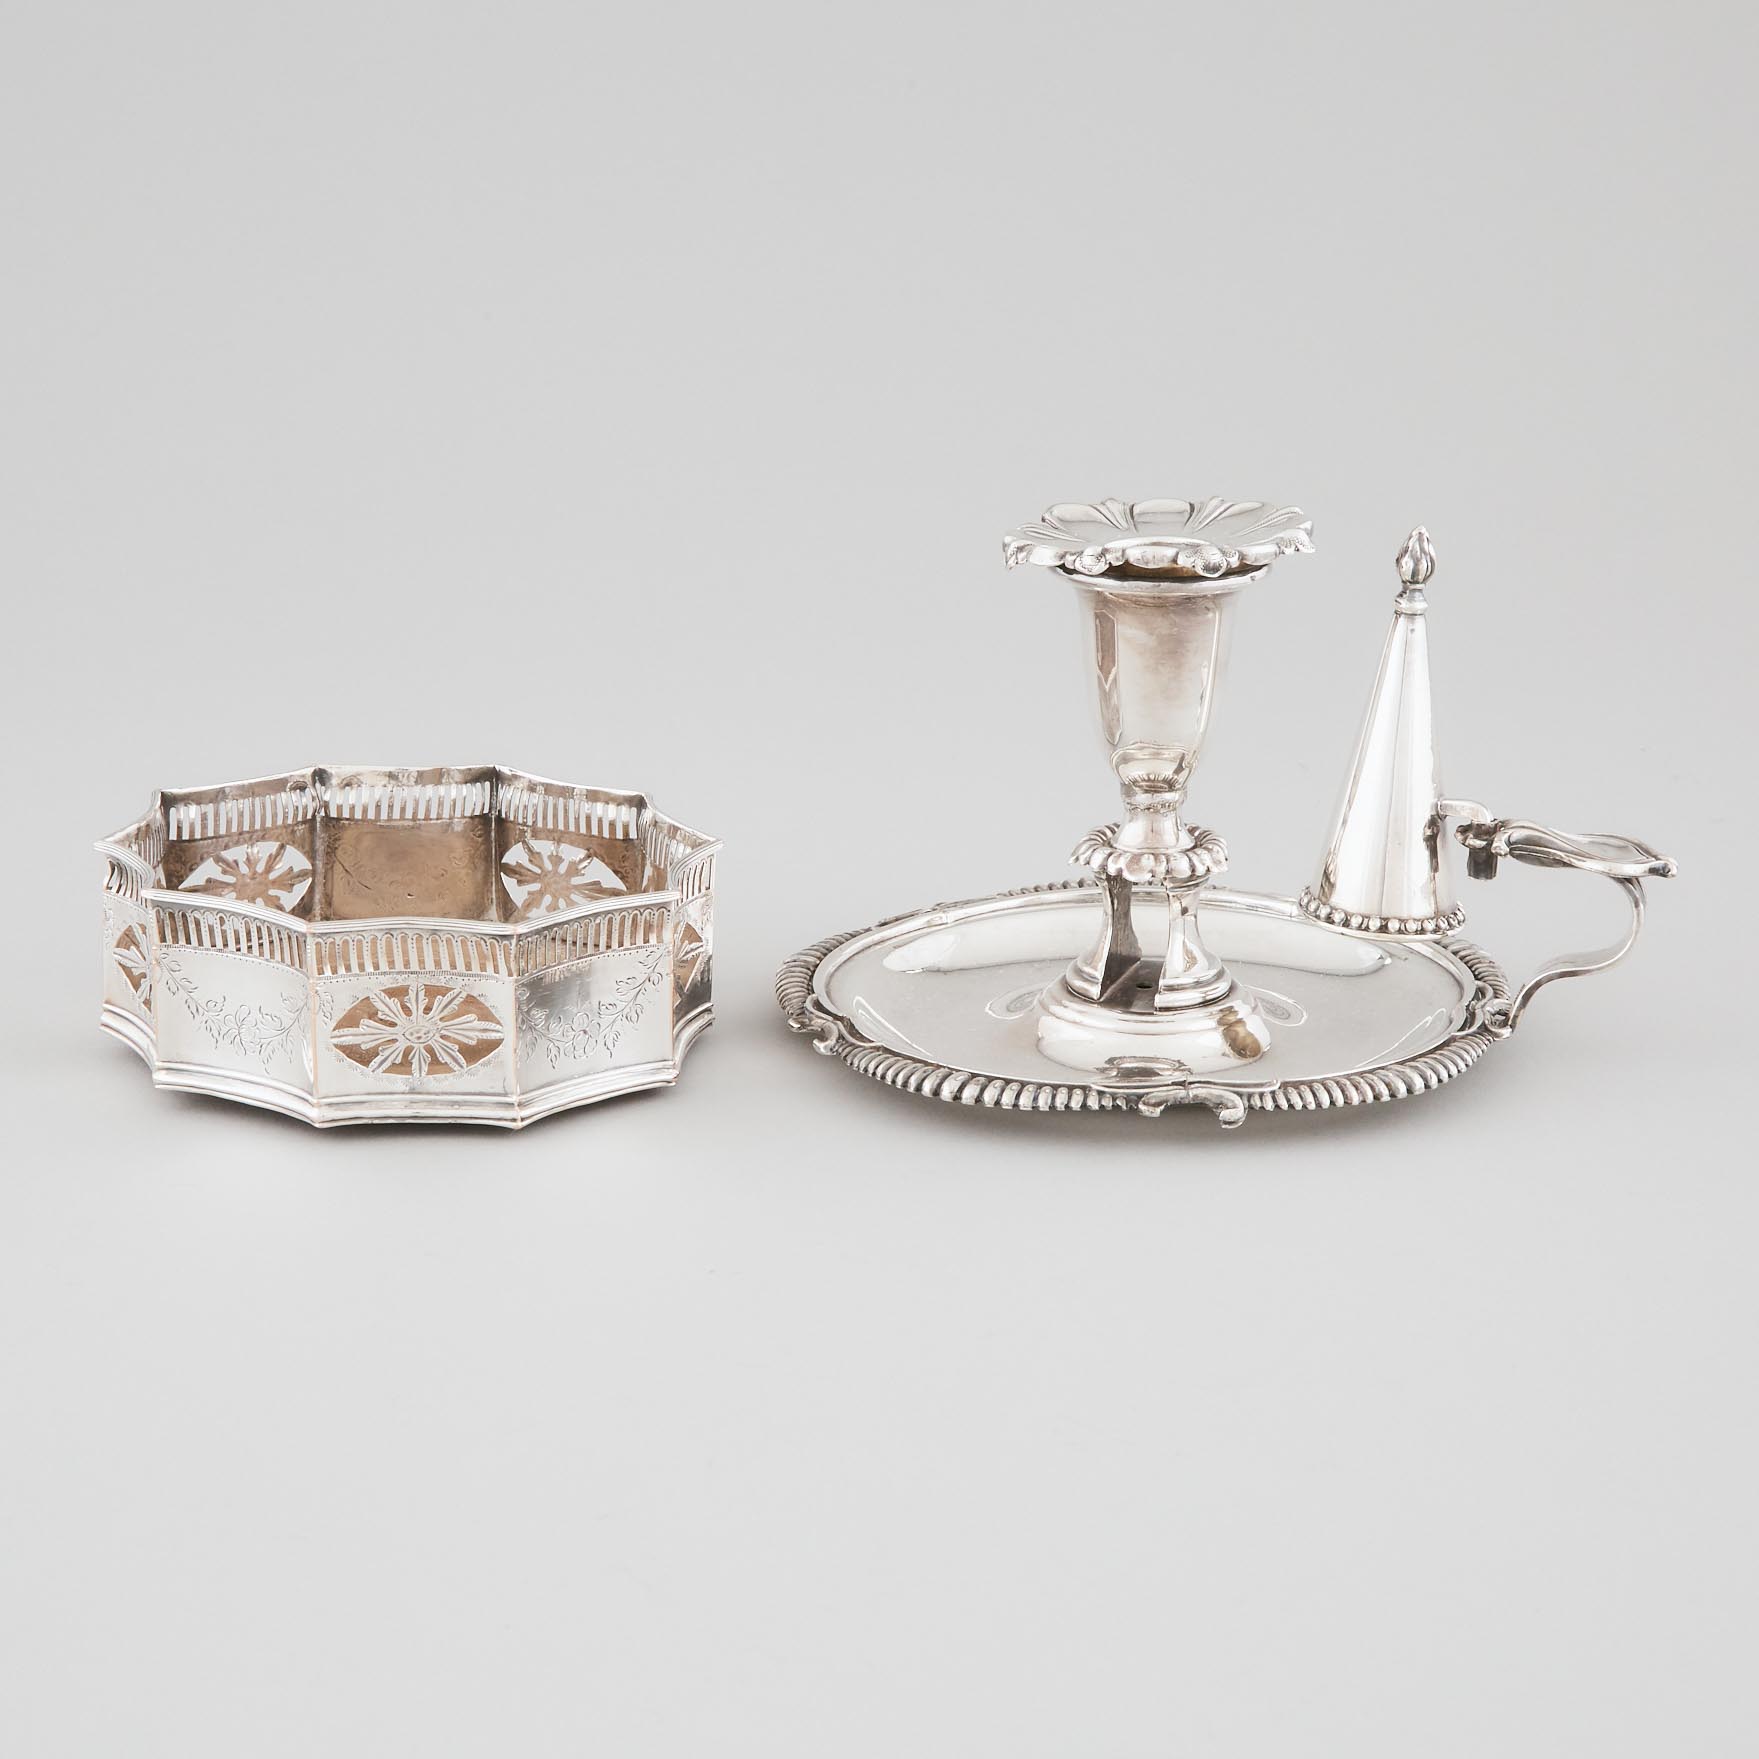 Old Sheffield Plate Wine Coaster and a Victorian Plated Chamberstick, late 18th/19th century